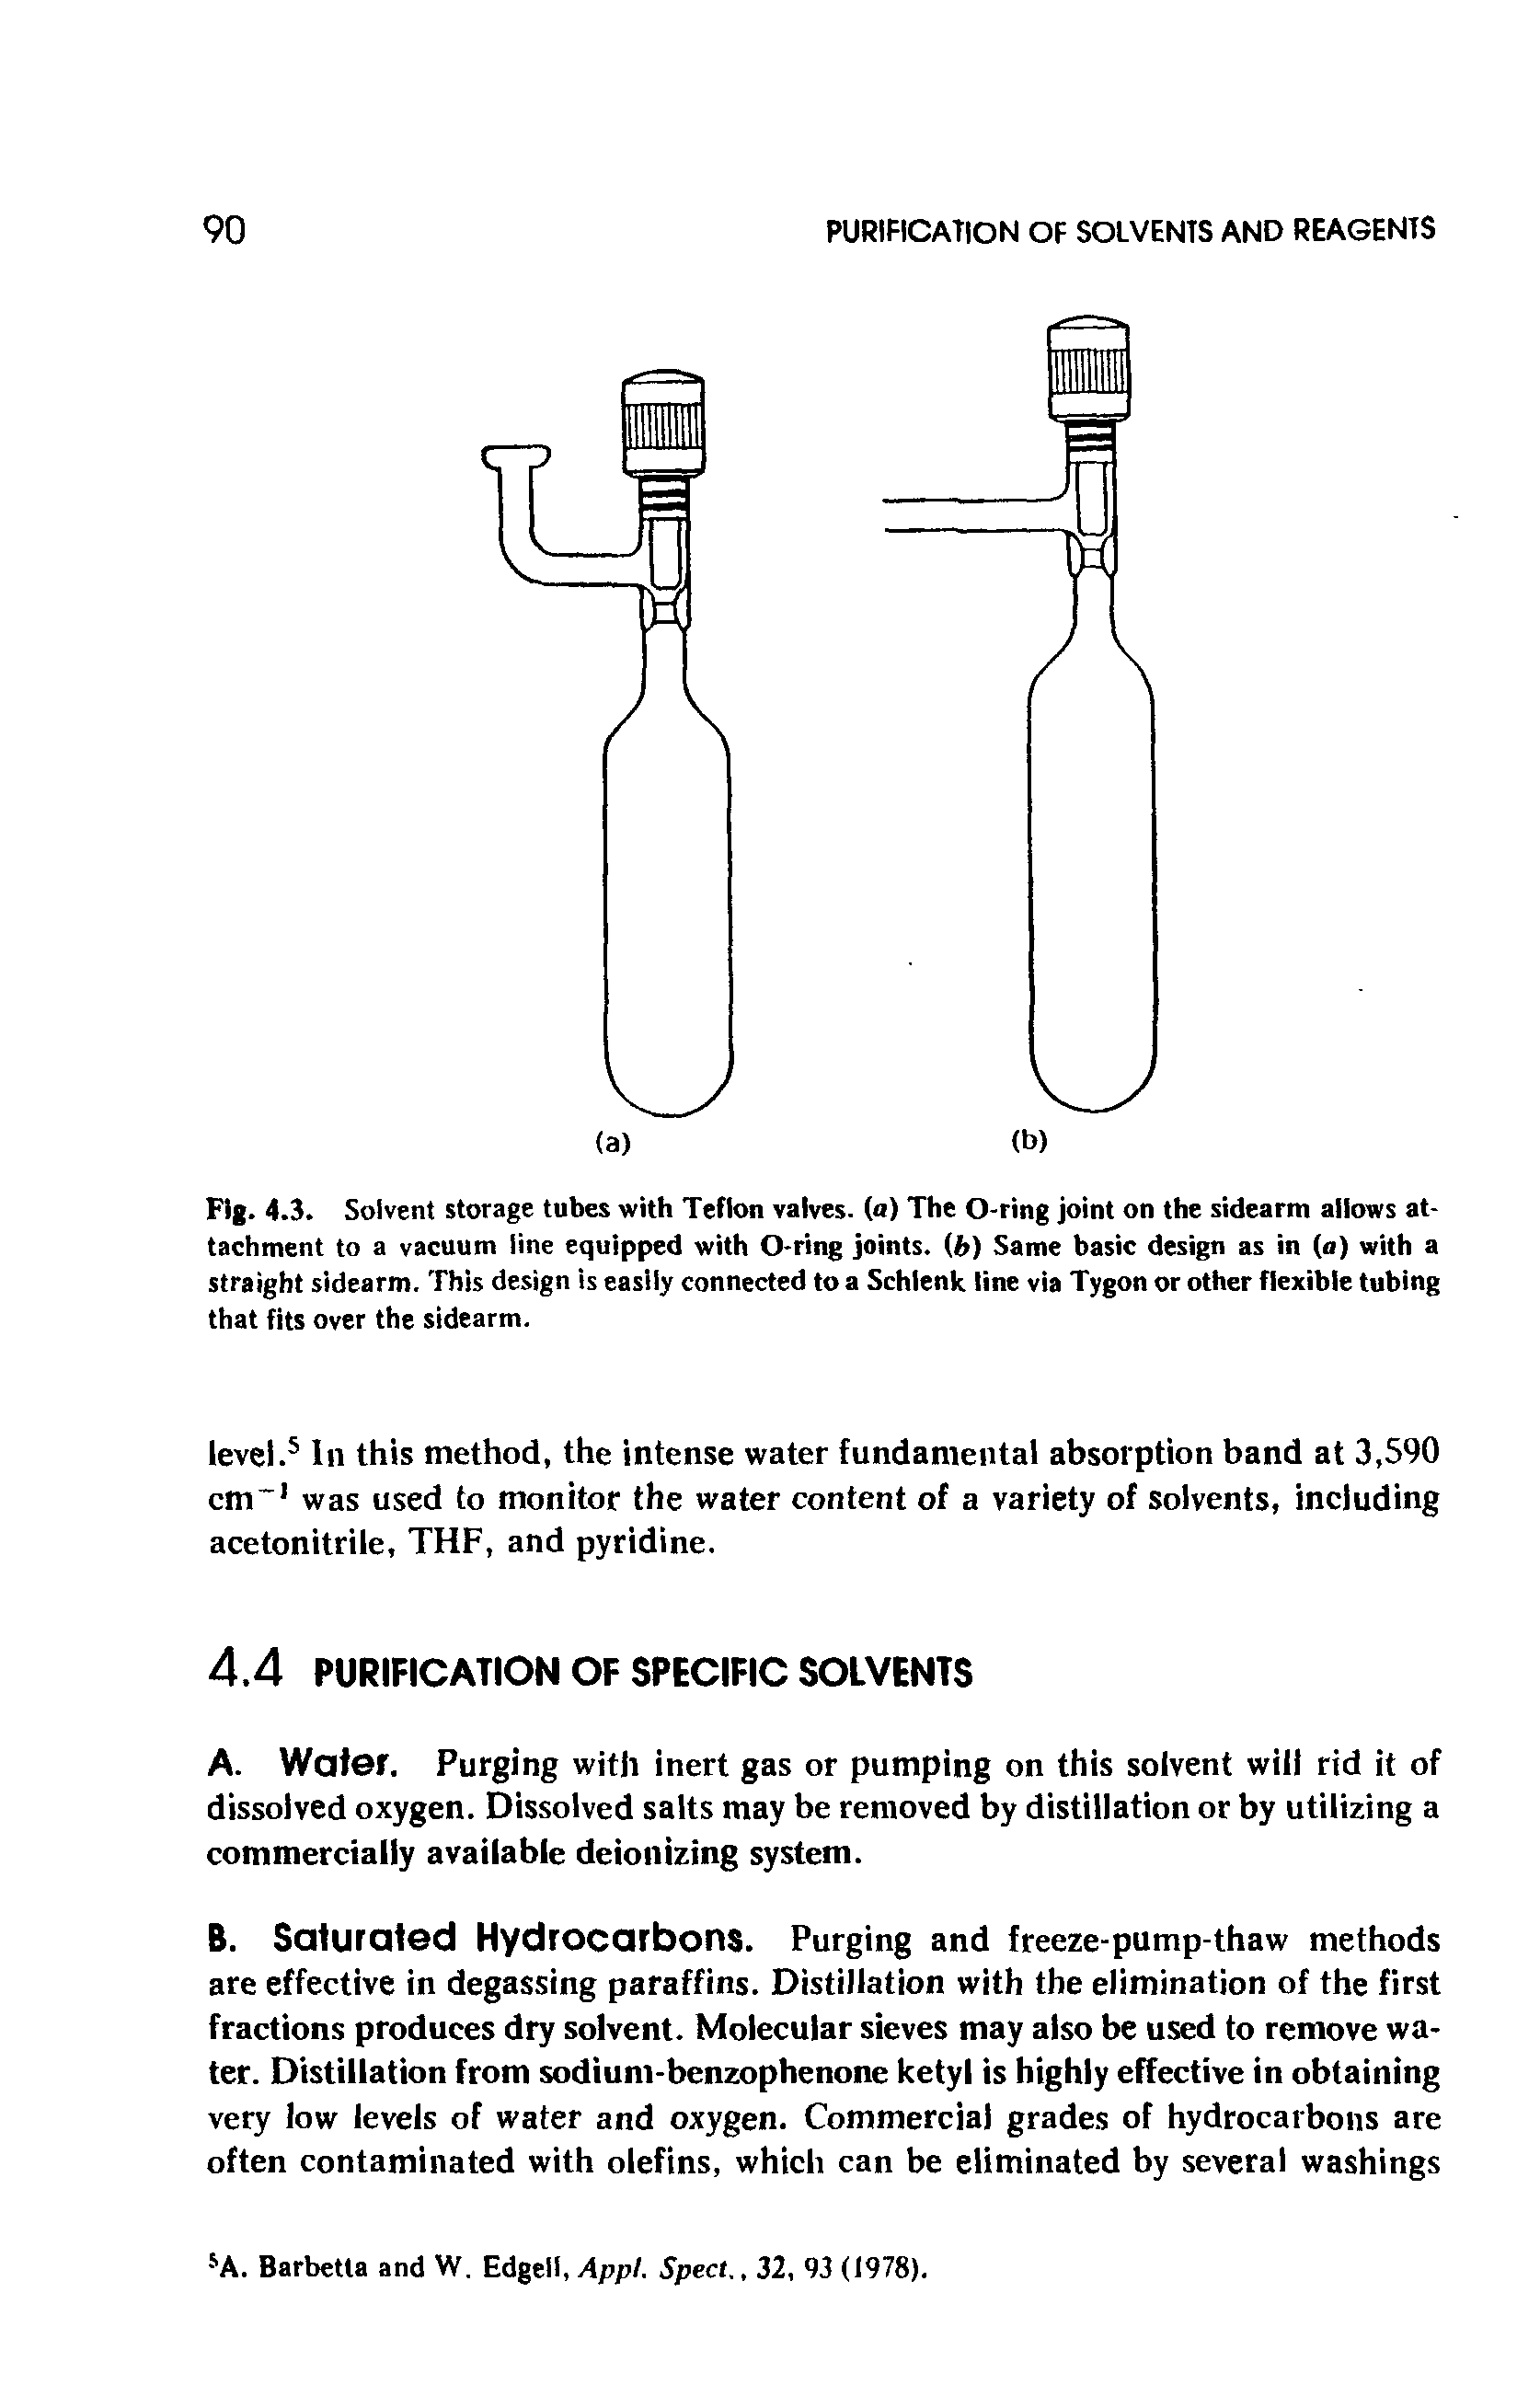 Fig. 4.3. Solvent storage tubes with Teflon valves, (a) The O-ring joint on the sidearm allows attachment to a vacuum line equipped with O-ring joints, (b) Same basic design as in (a) with a straight sidearm. This design is easily connected to a Schlenk line via Tygon or other flexible tubing that fits over the sidearm.